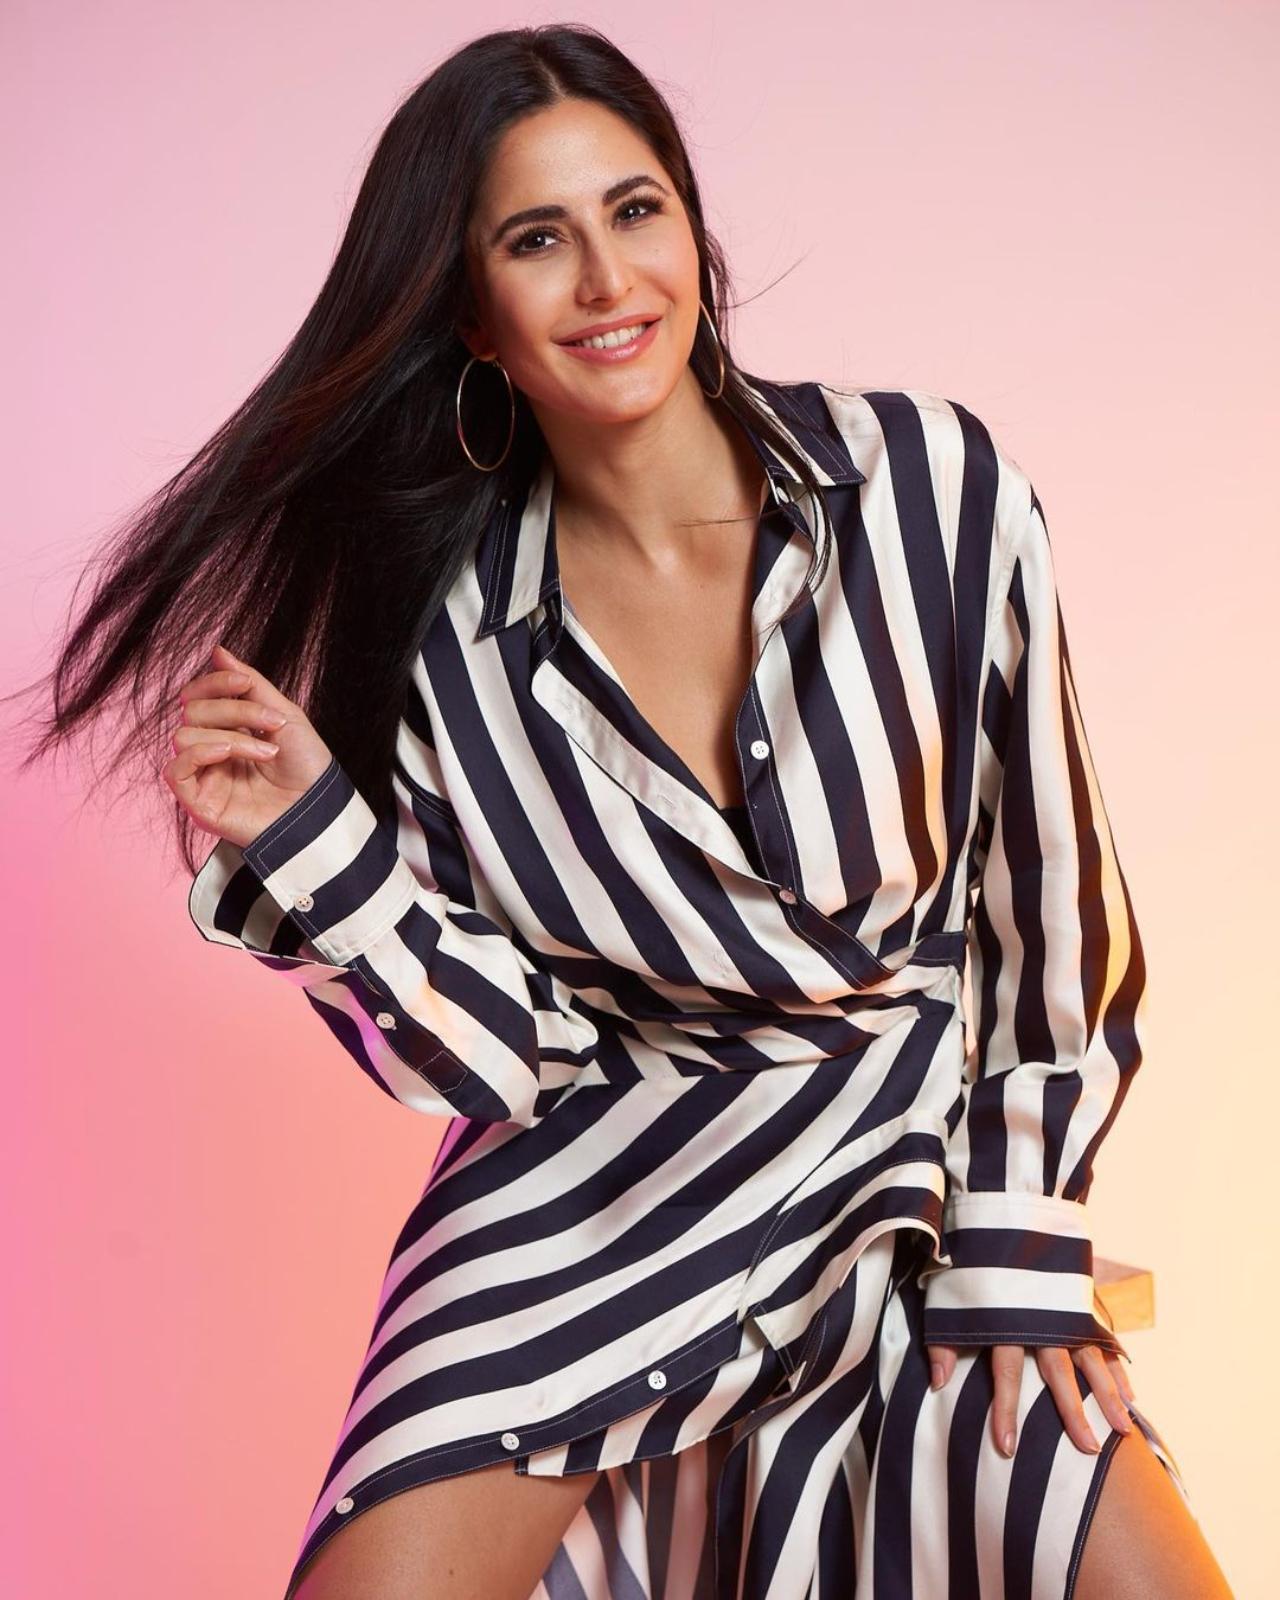 Katrina reveals Vicky's special birthday gift for her
During the rapid fire round, Karan asked Katrina about the sweetest gesture by Vicky Kaushal, she shared, 